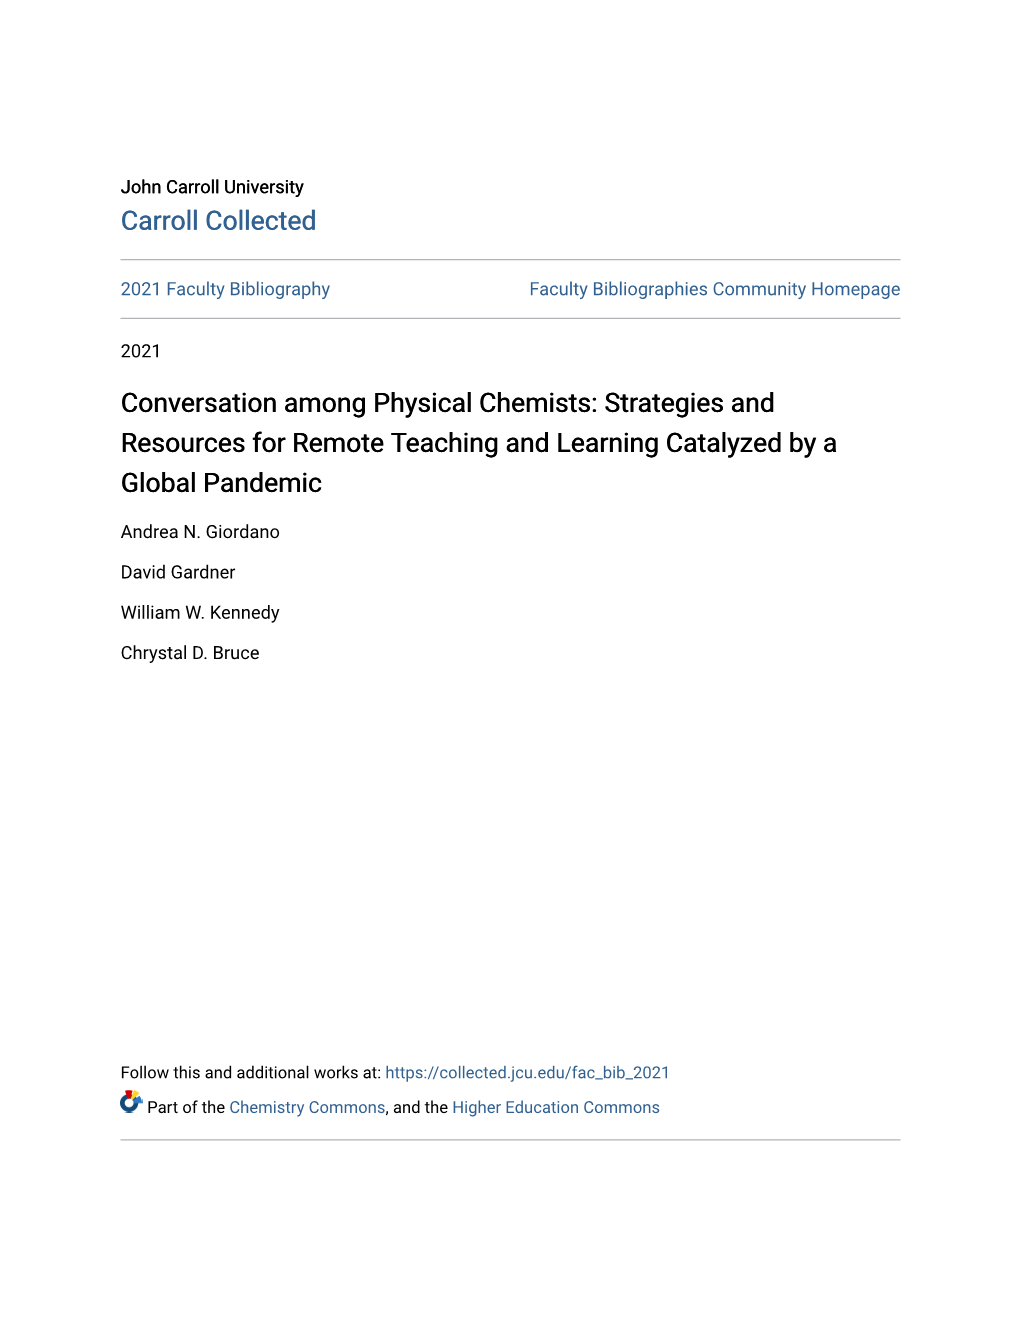 Conversation Among Physical Chemists: Strategies and Resources for Remote Teaching and Learning Catalyzed by a Global Pandemic